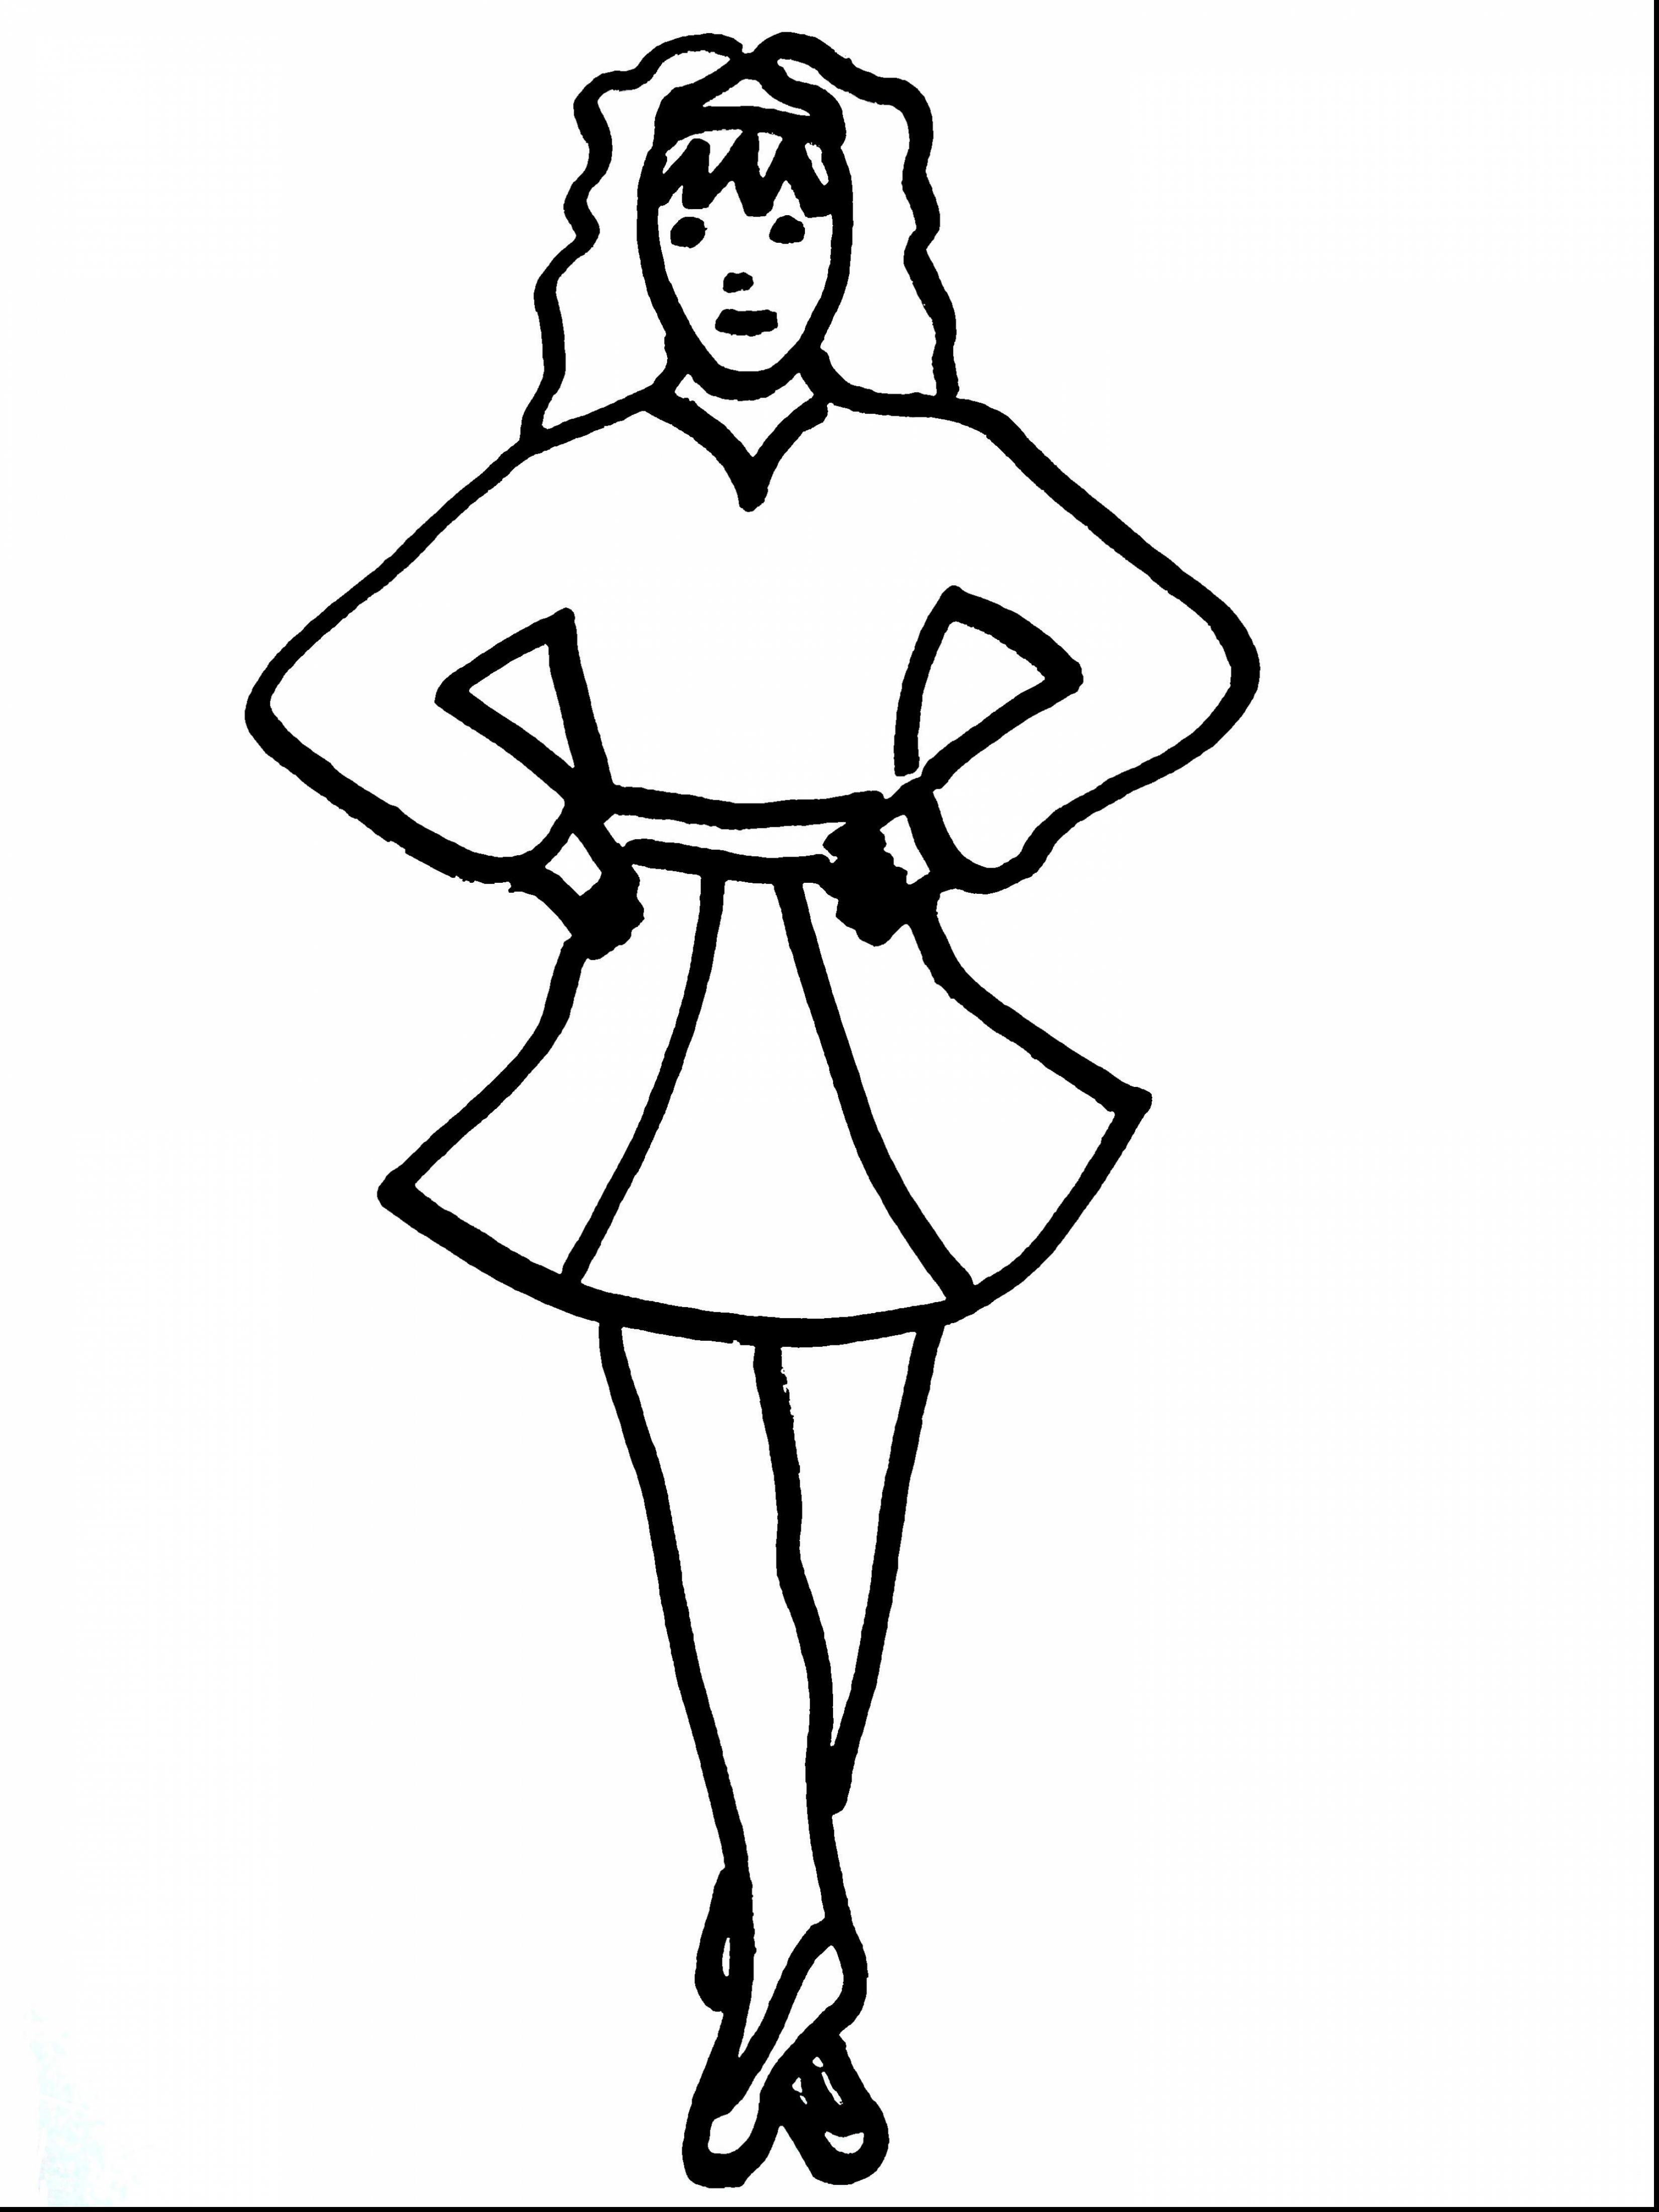 picture gallery for you - page 5 : Excellent Star Coloring Page ...